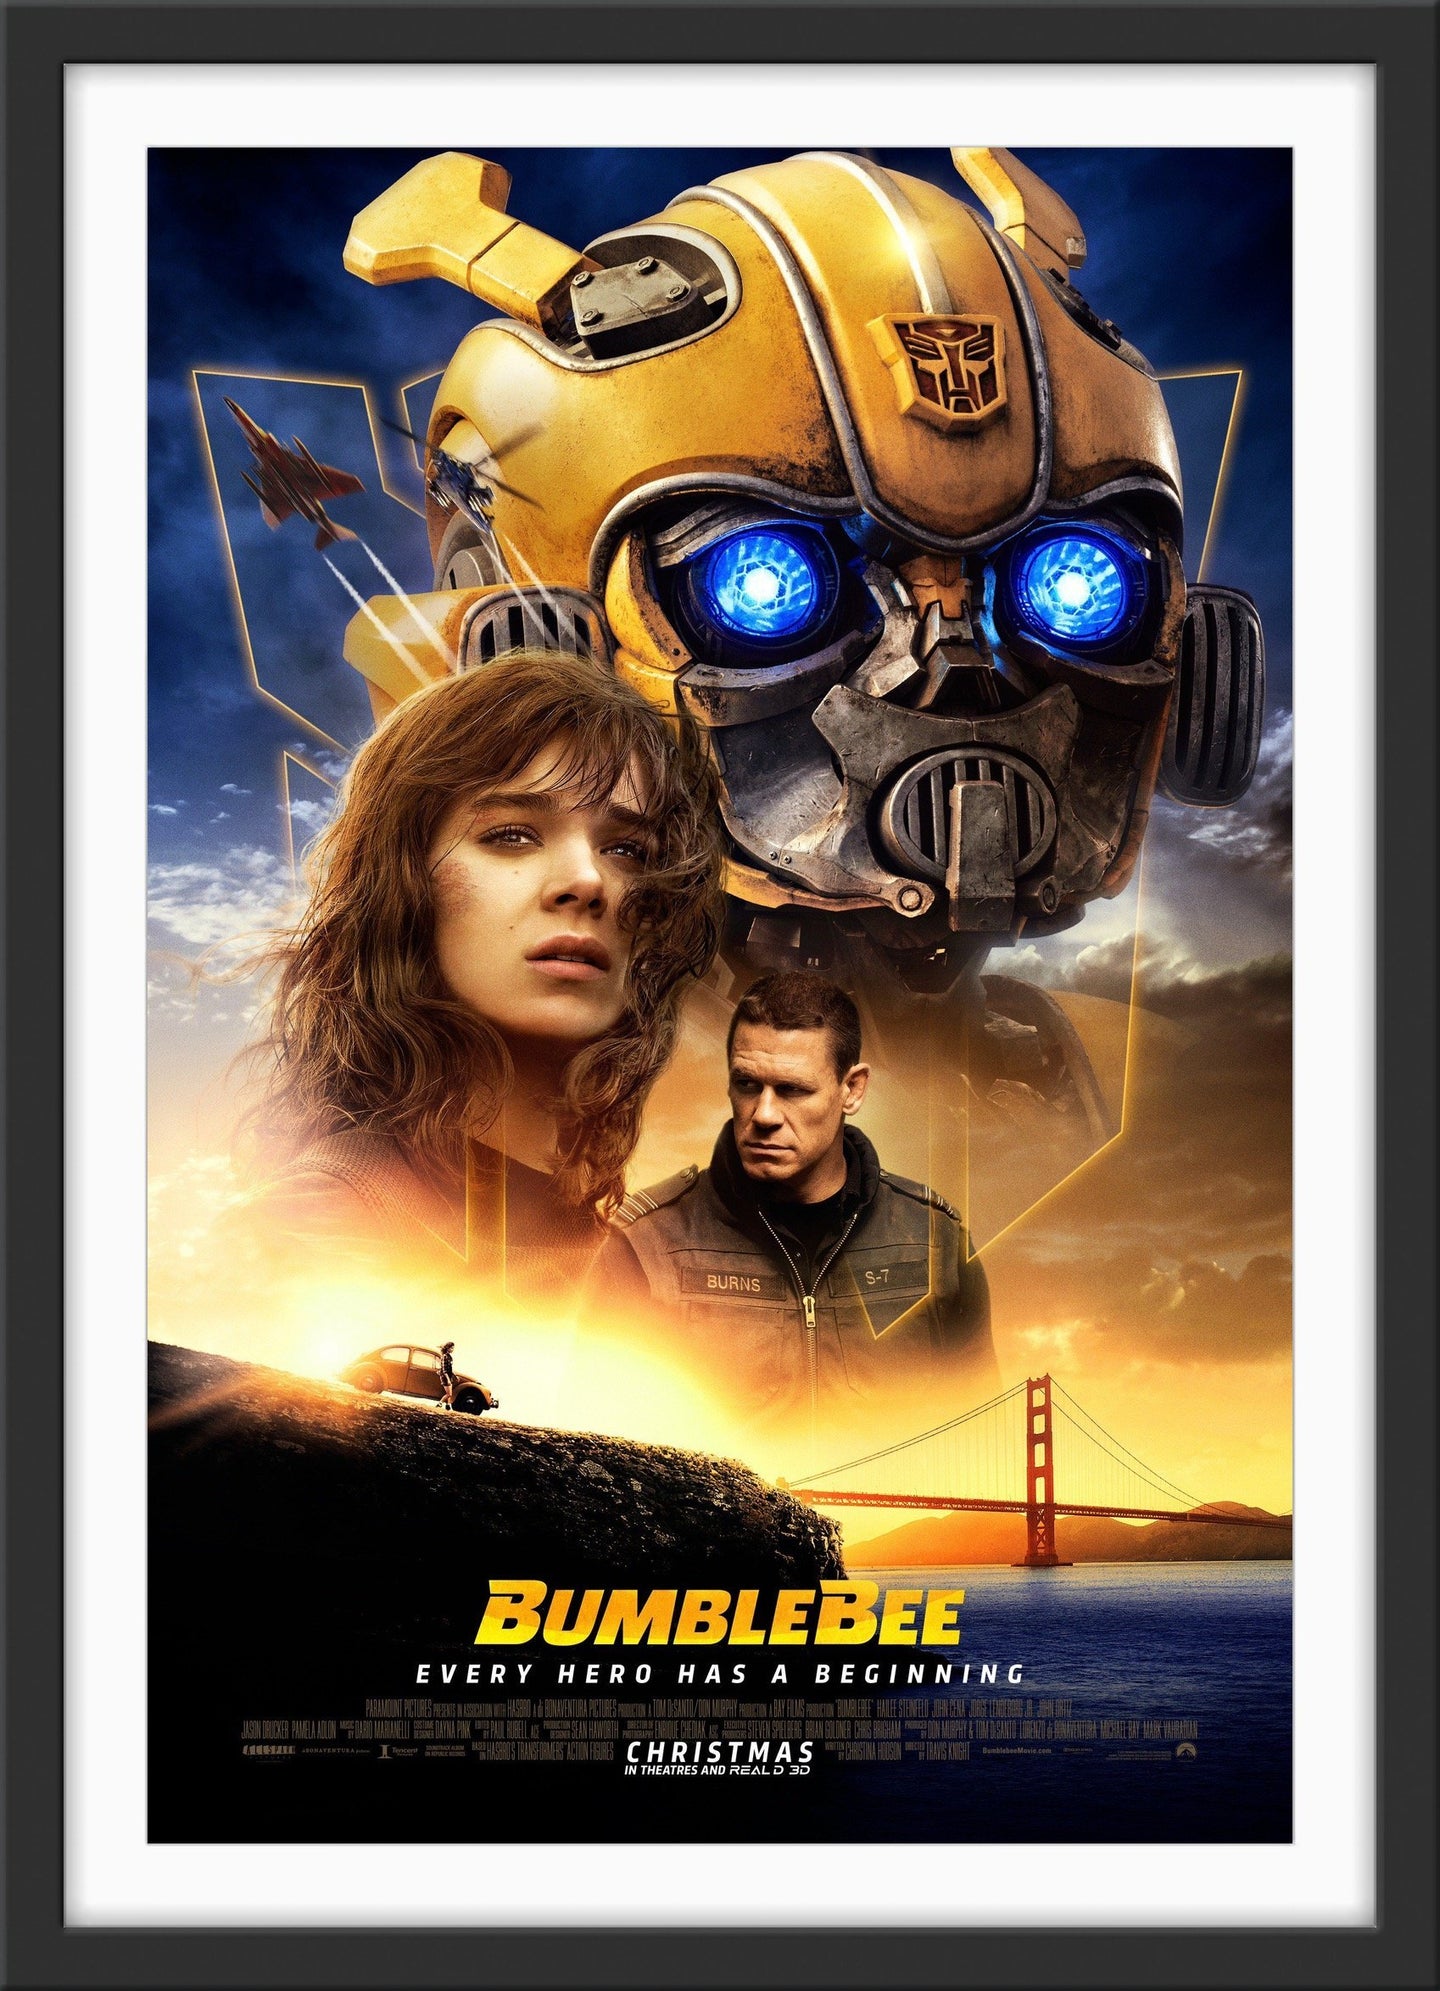 An original movie poster for the Transformers film Bumblebee